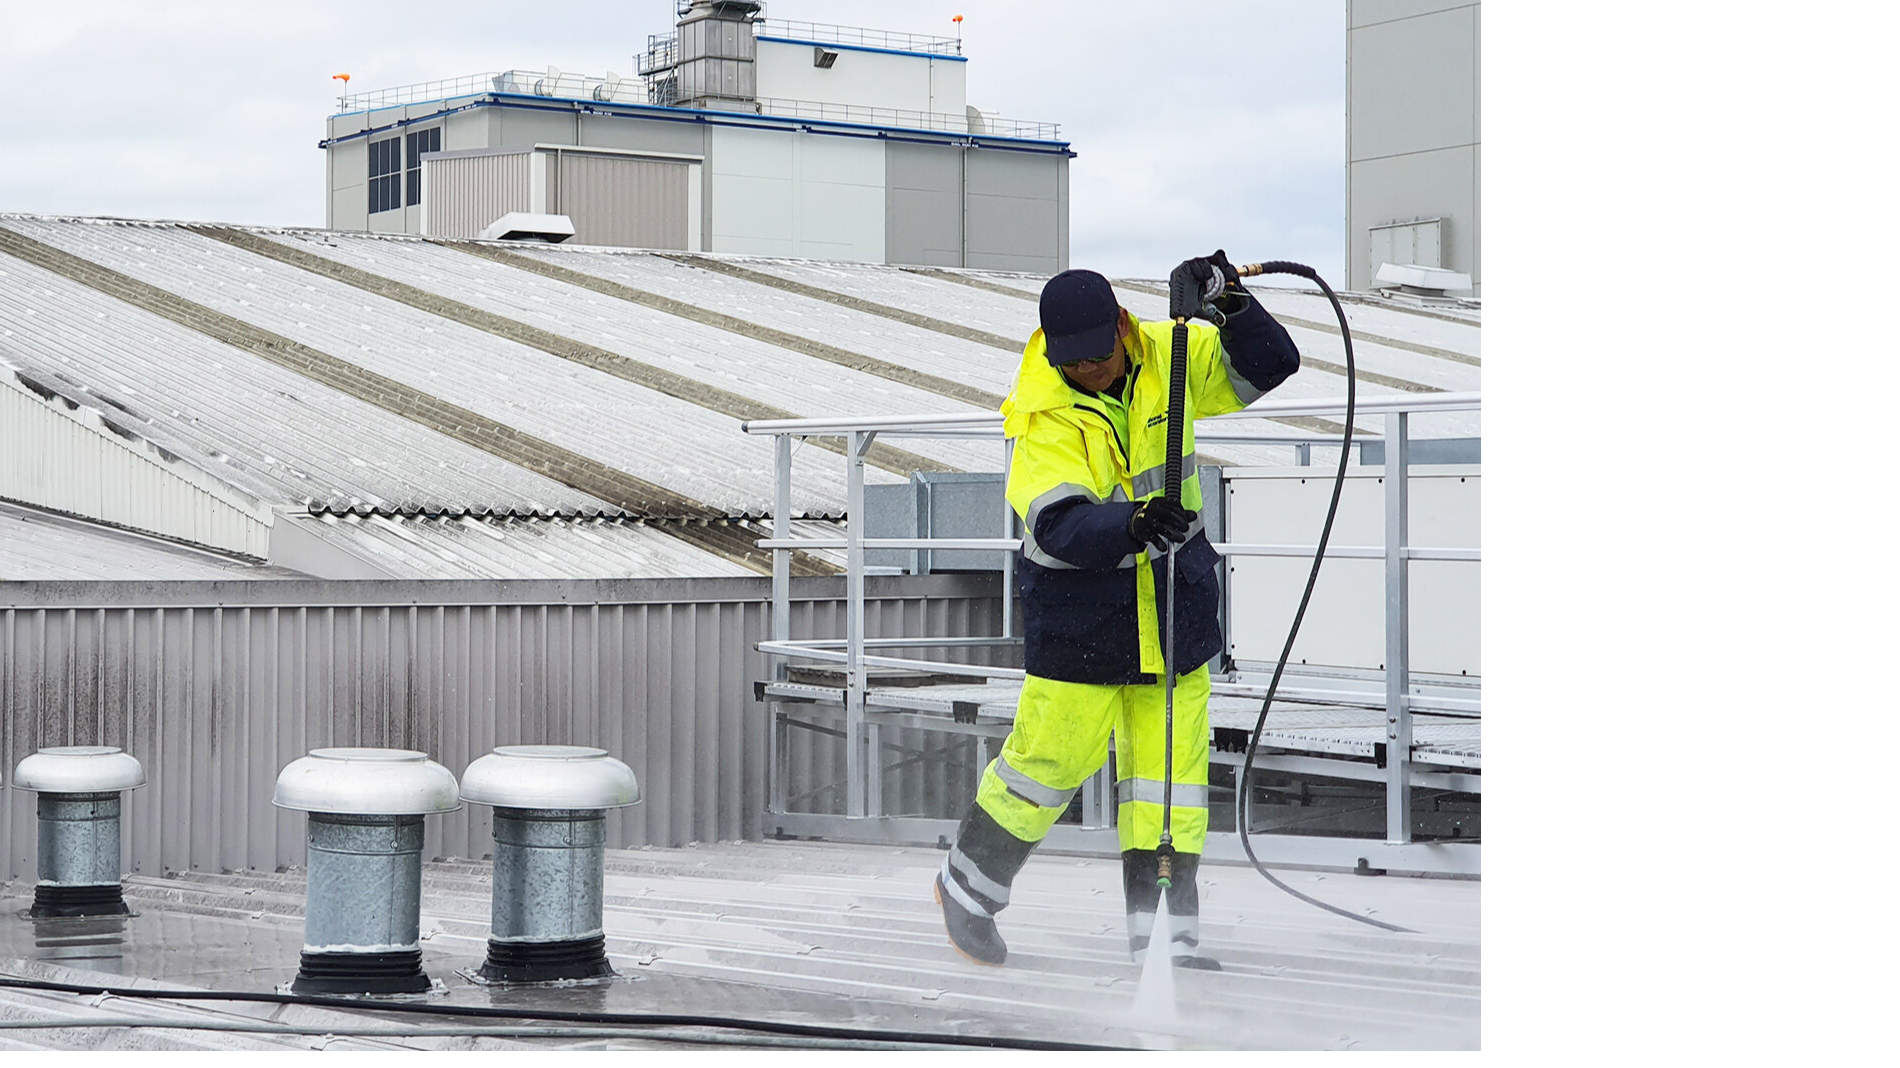 Commercial Roof Painters Wellington - The Premier Wellington Roof Painters